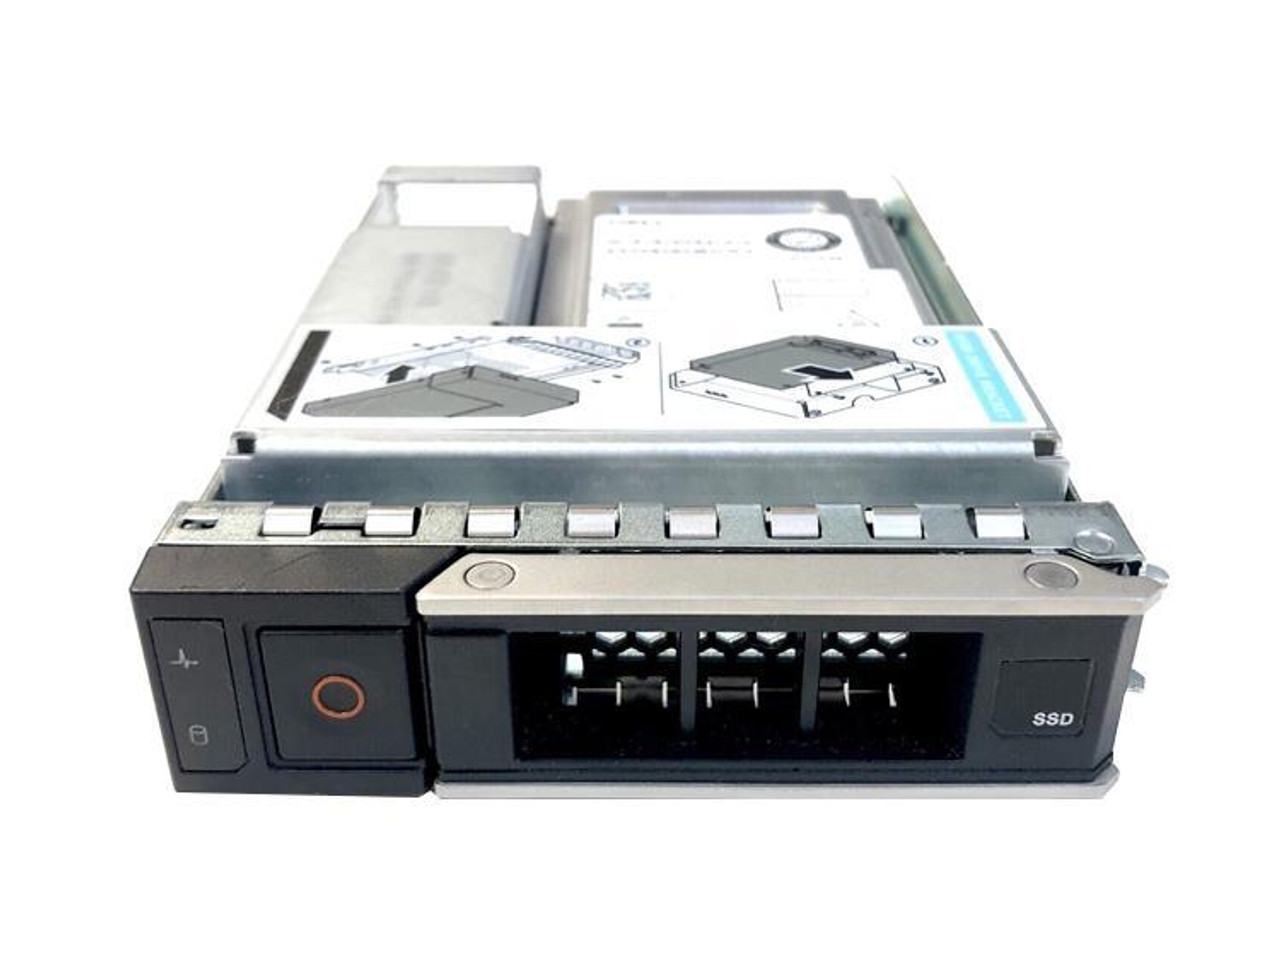 Dell 960GB SAS 12Gbps Hot Swap Read Intensive 2.5-inch Internal Solid State Drive (SSD) with Tray